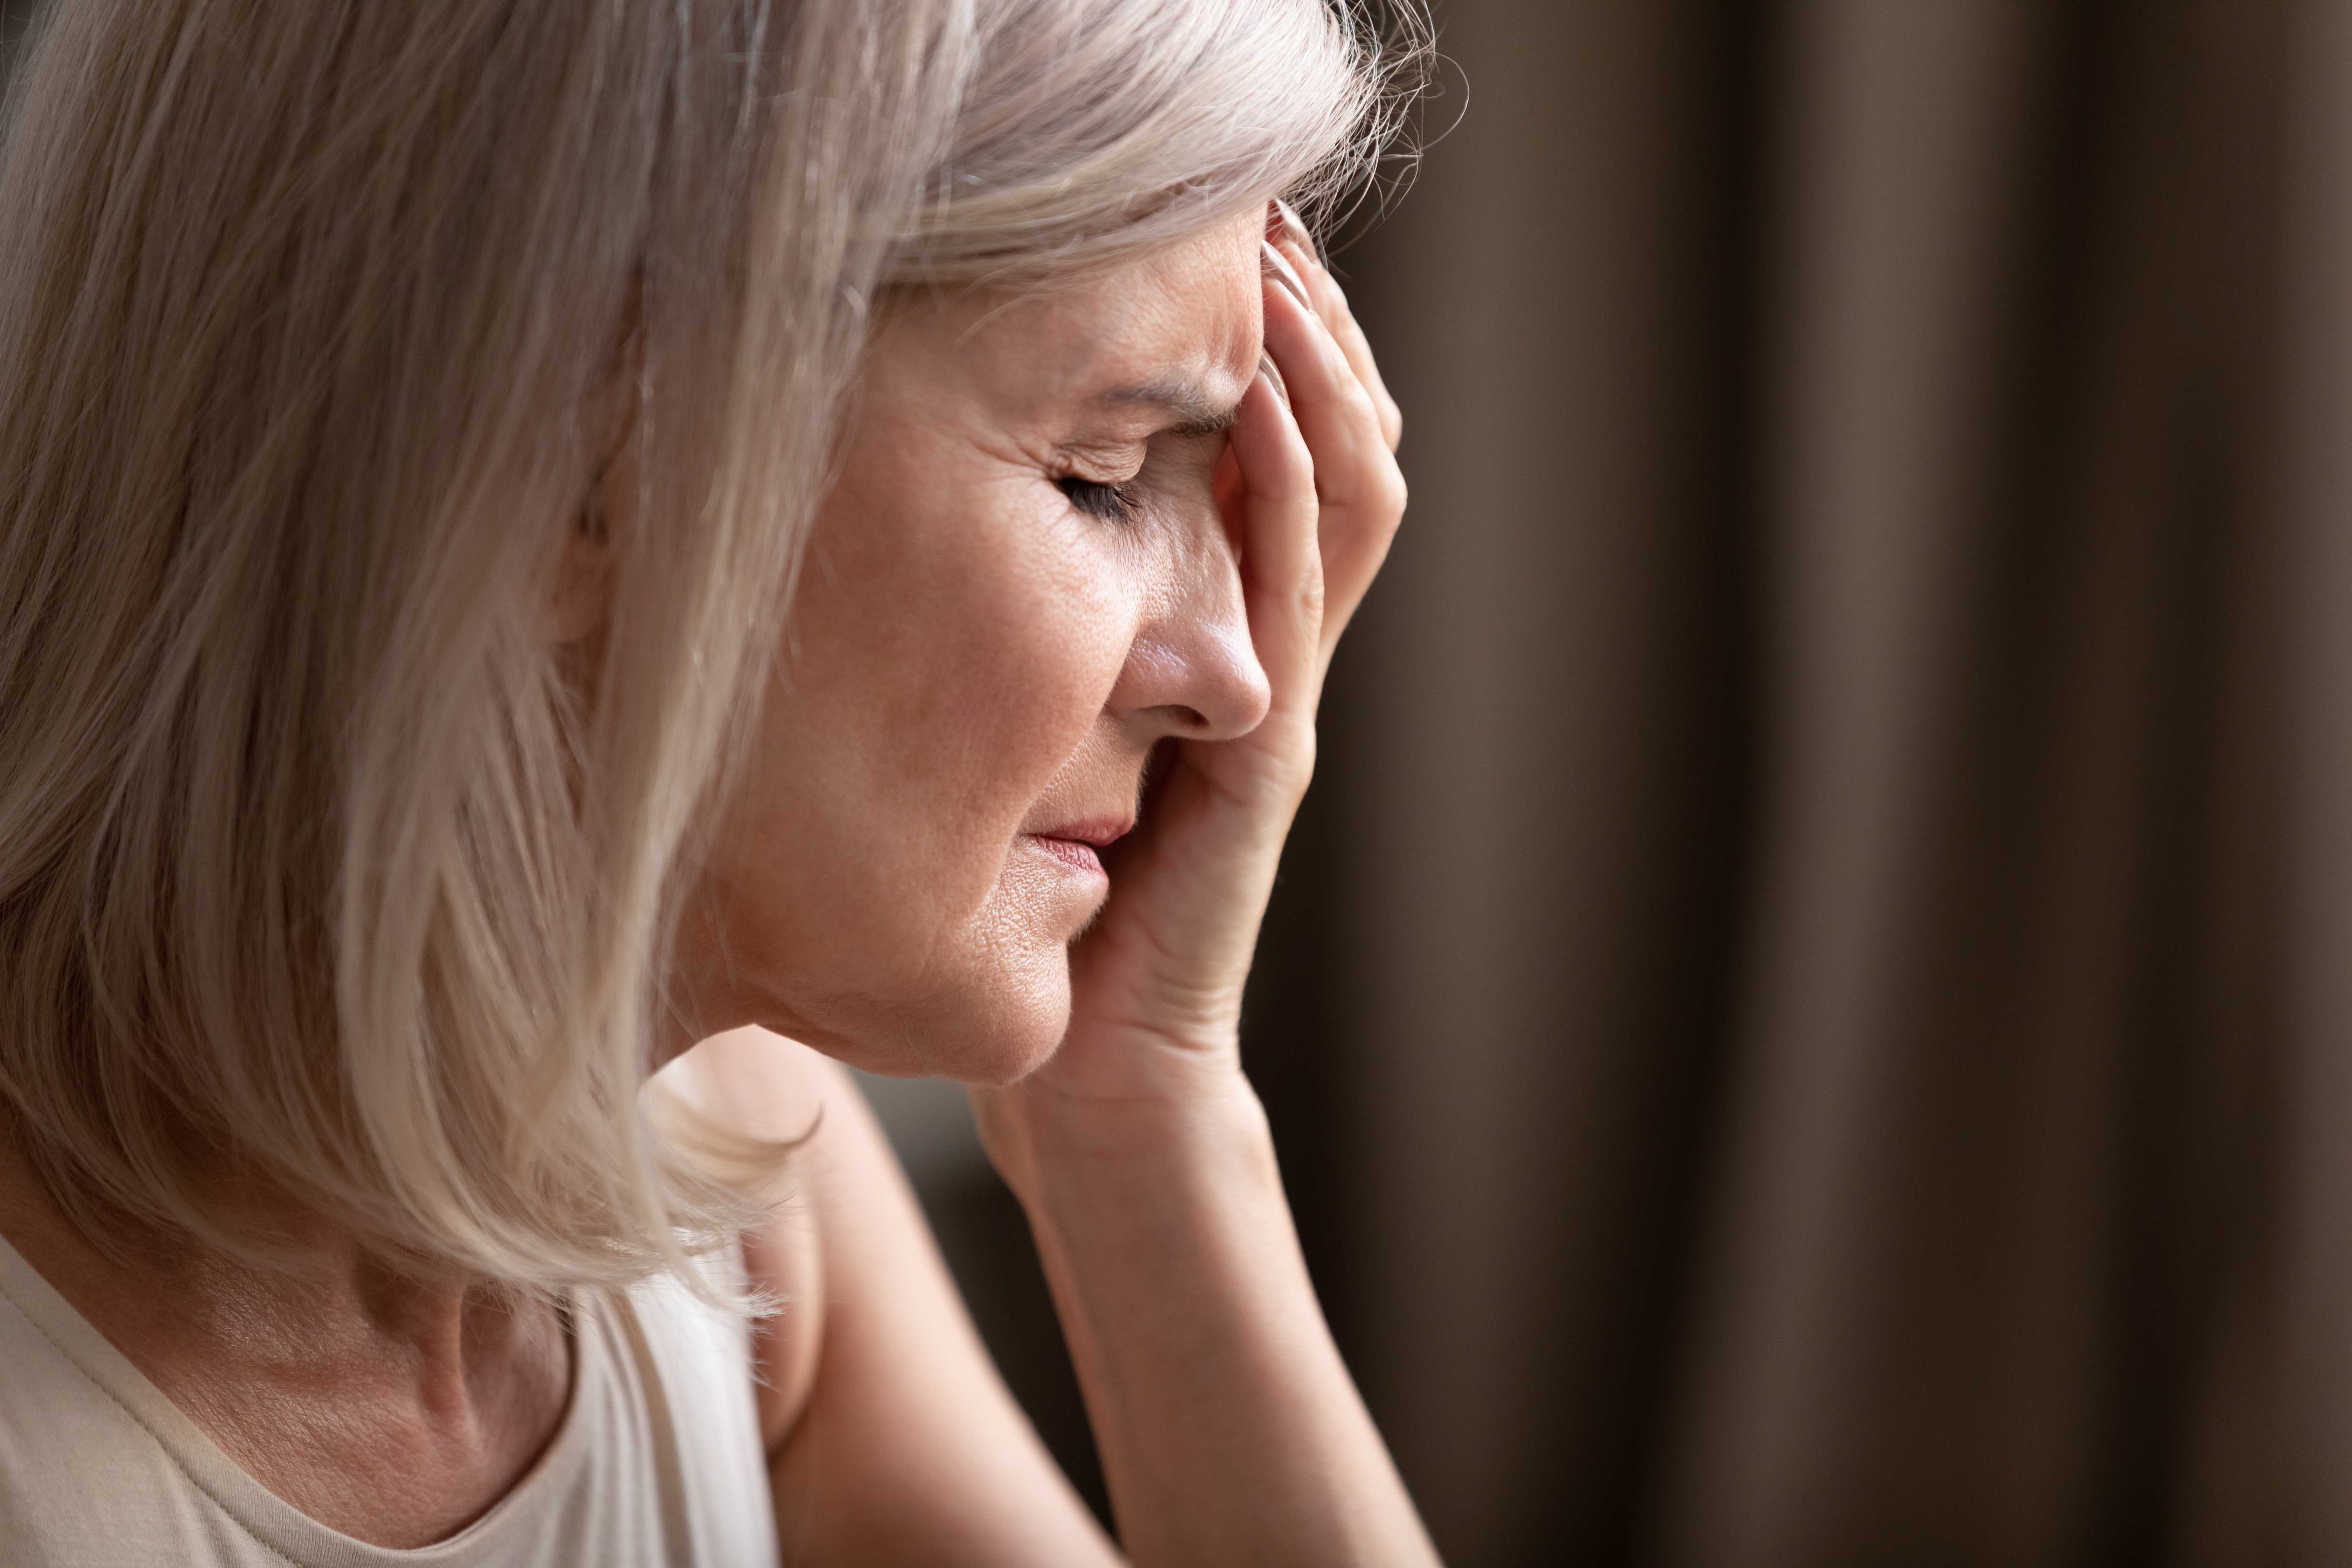 A dissapointed elderly woman | Source: Shutterstock